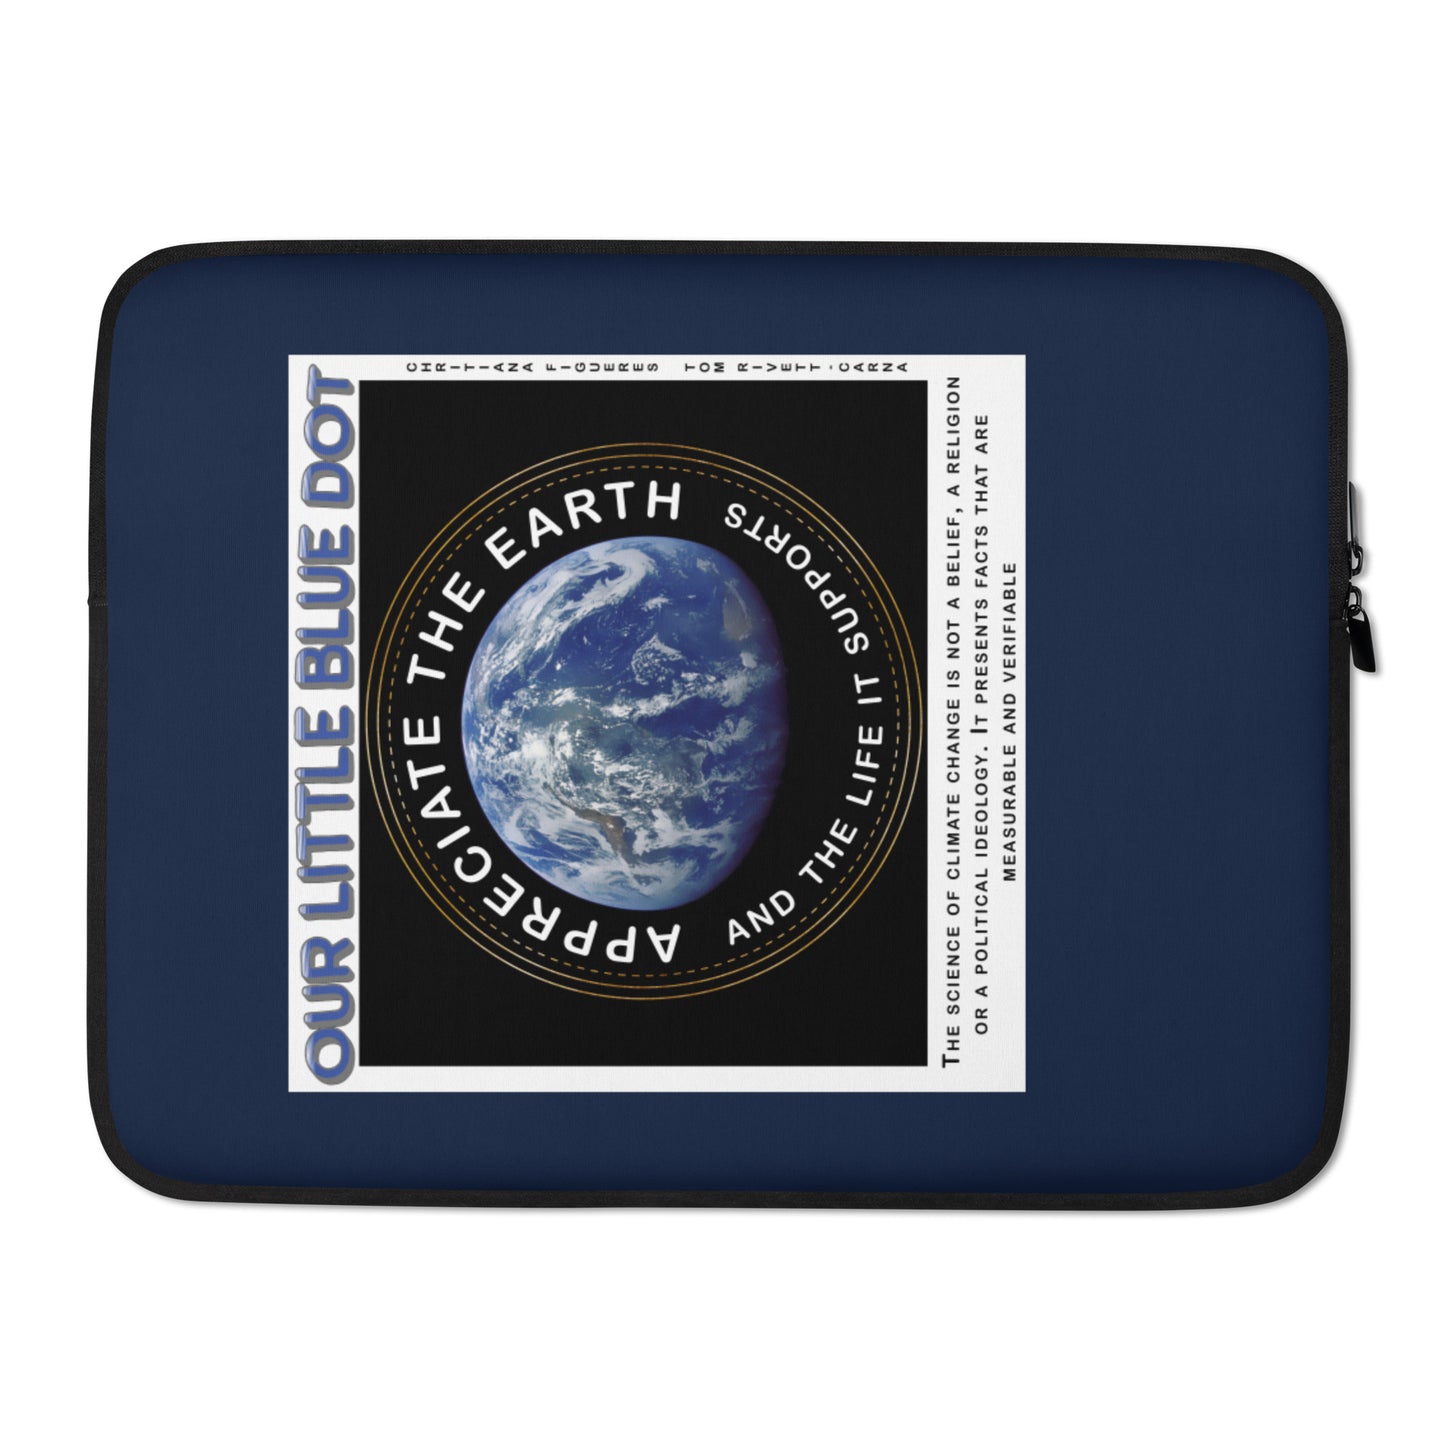 Laptop Sleeve - Appreciate The Earth, Christiana Figueres